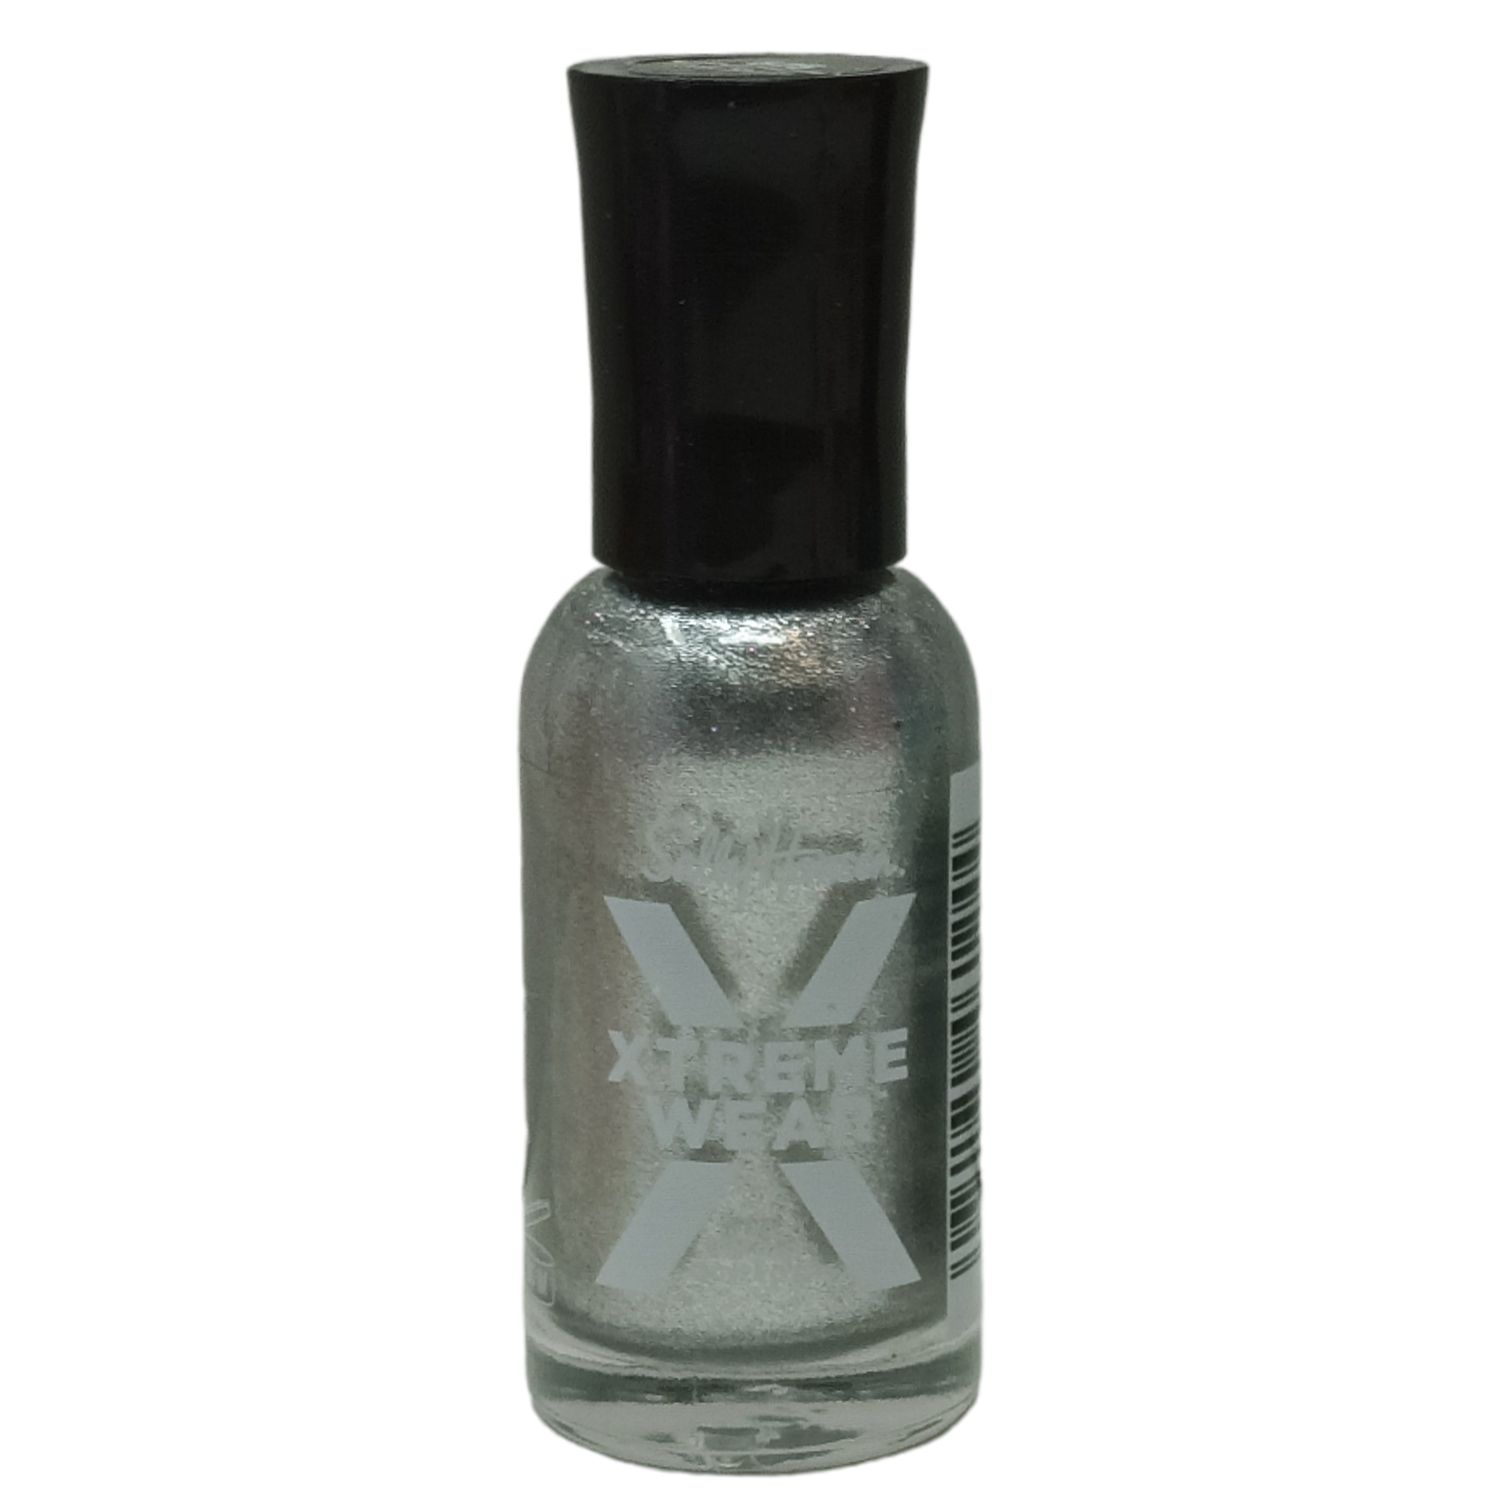 Sally Hansen Xtreme Wear Nail Polish, Silver Storm, 0.4 oz, Chip Resistant, Bold Color - image 1 of 6